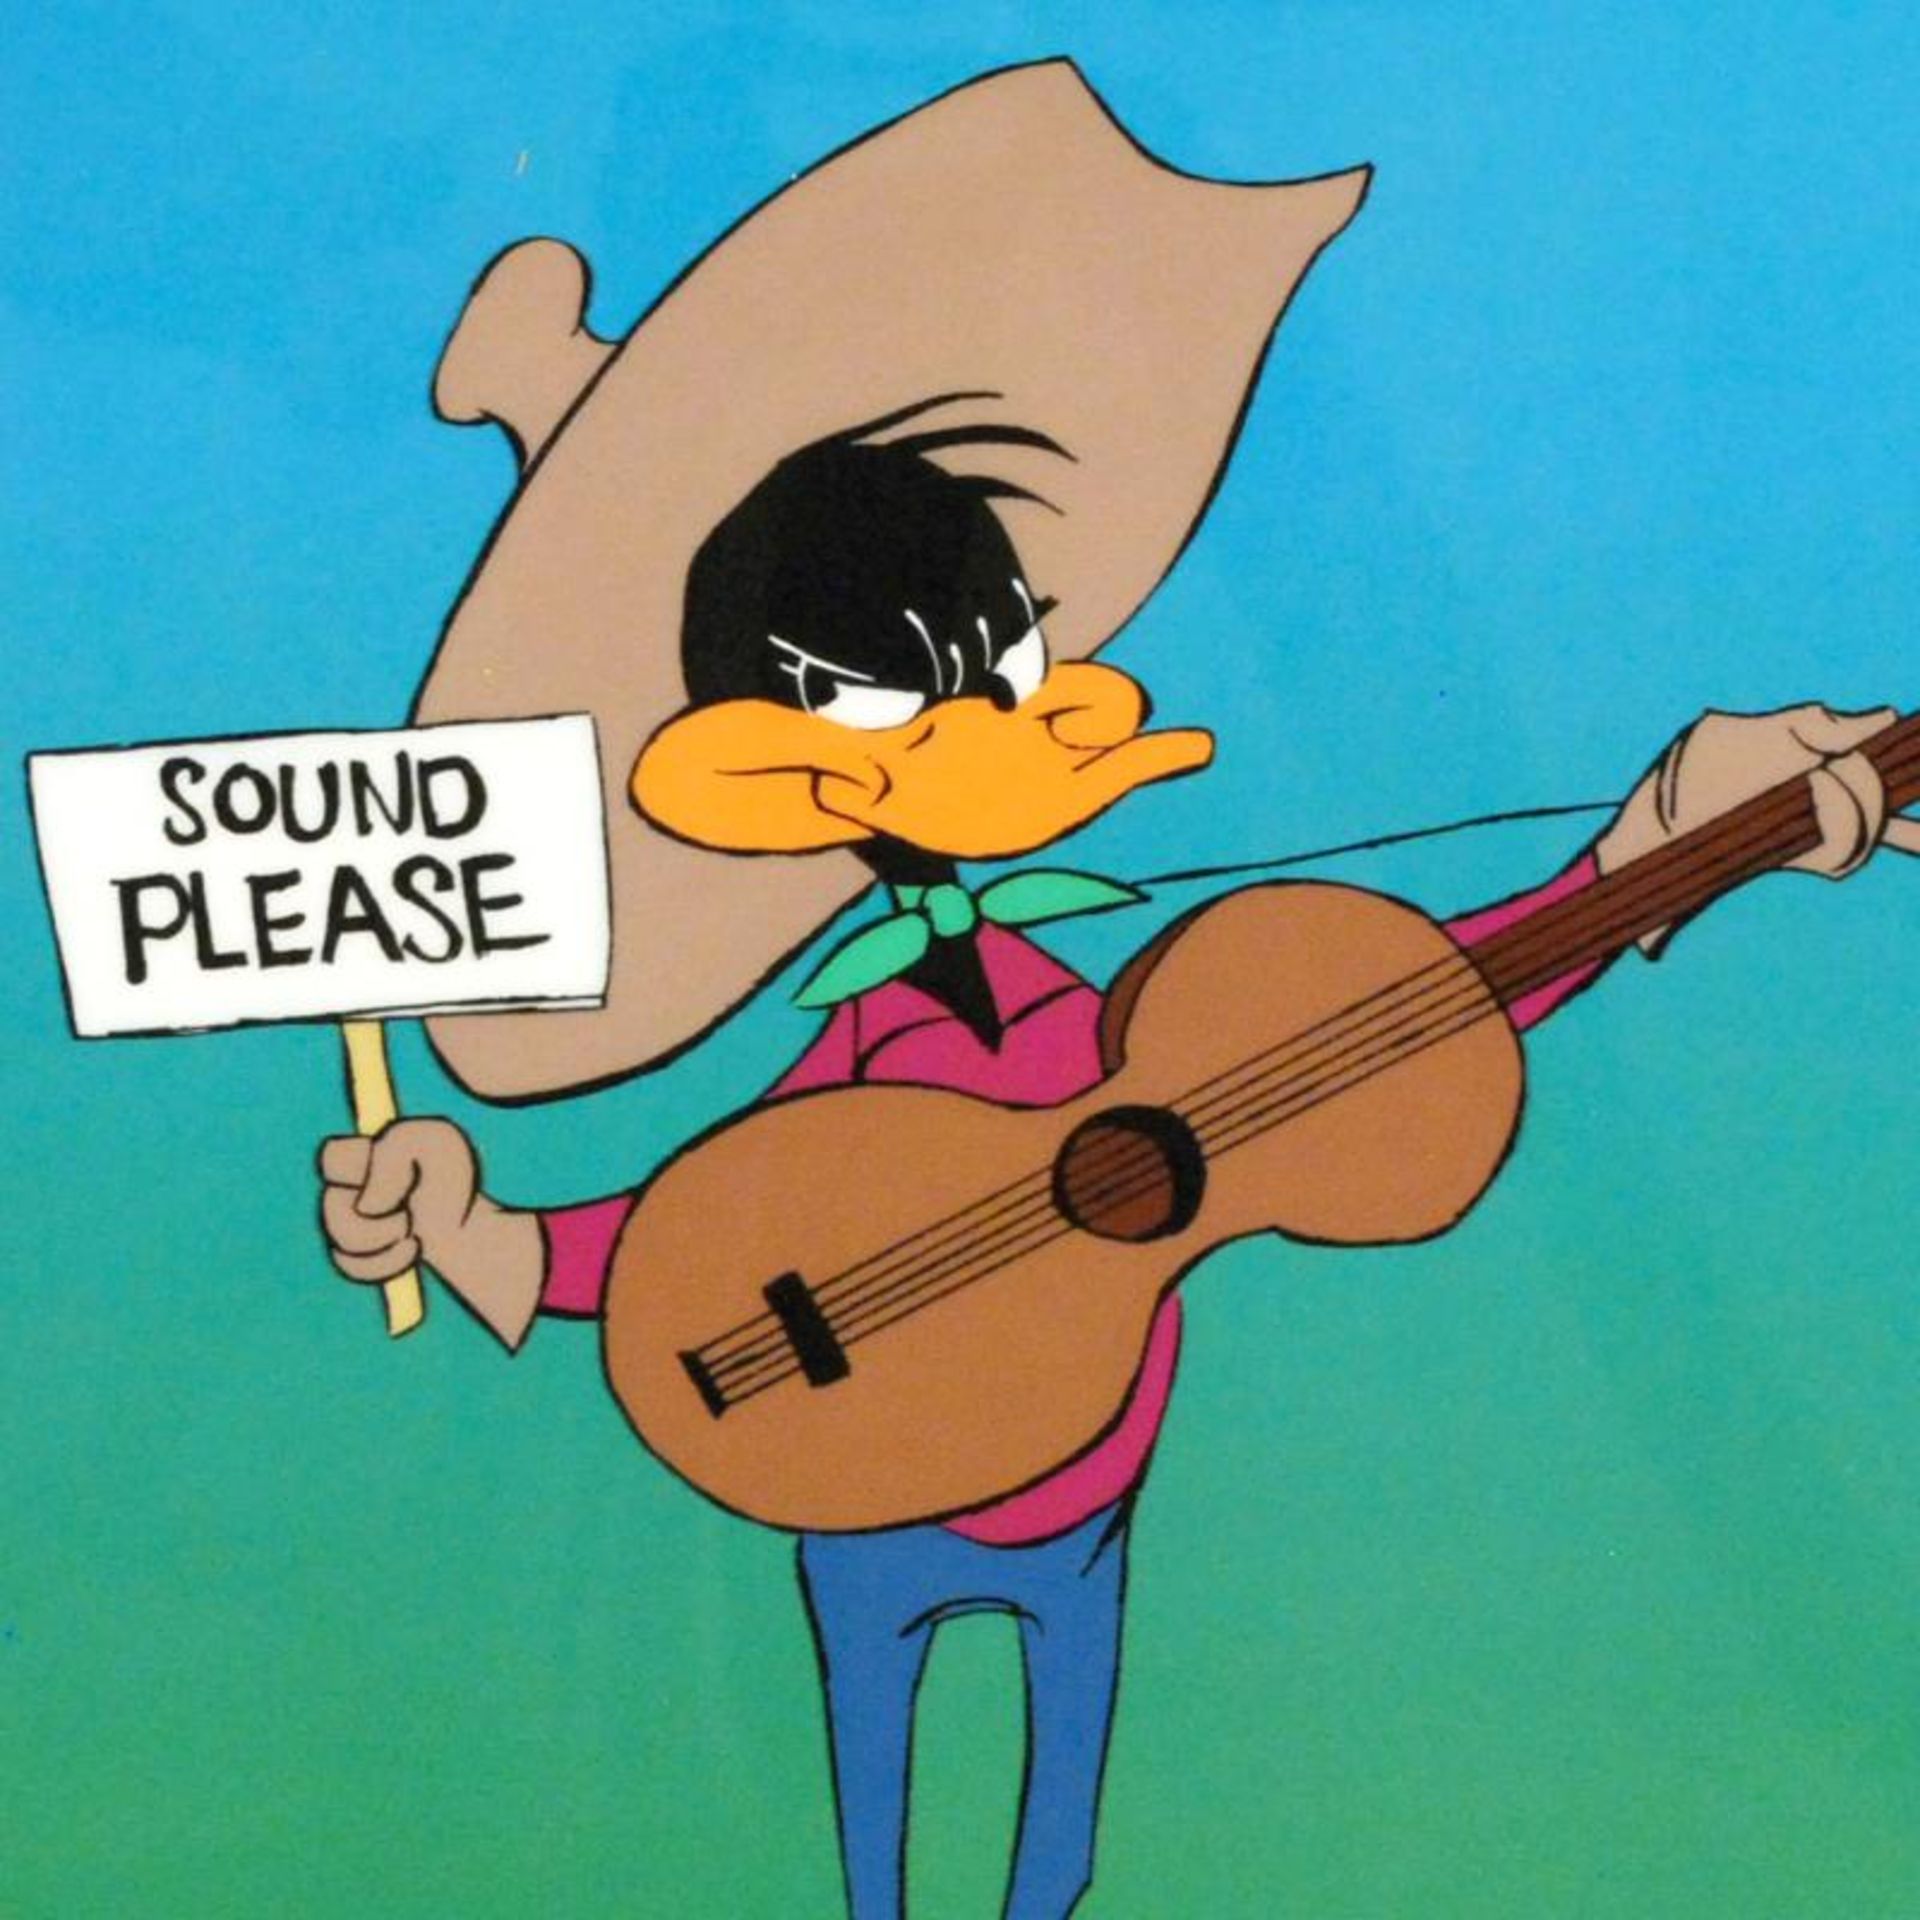 Sound Please by Chuck Jones (1912-2002) - Image 2 of 2